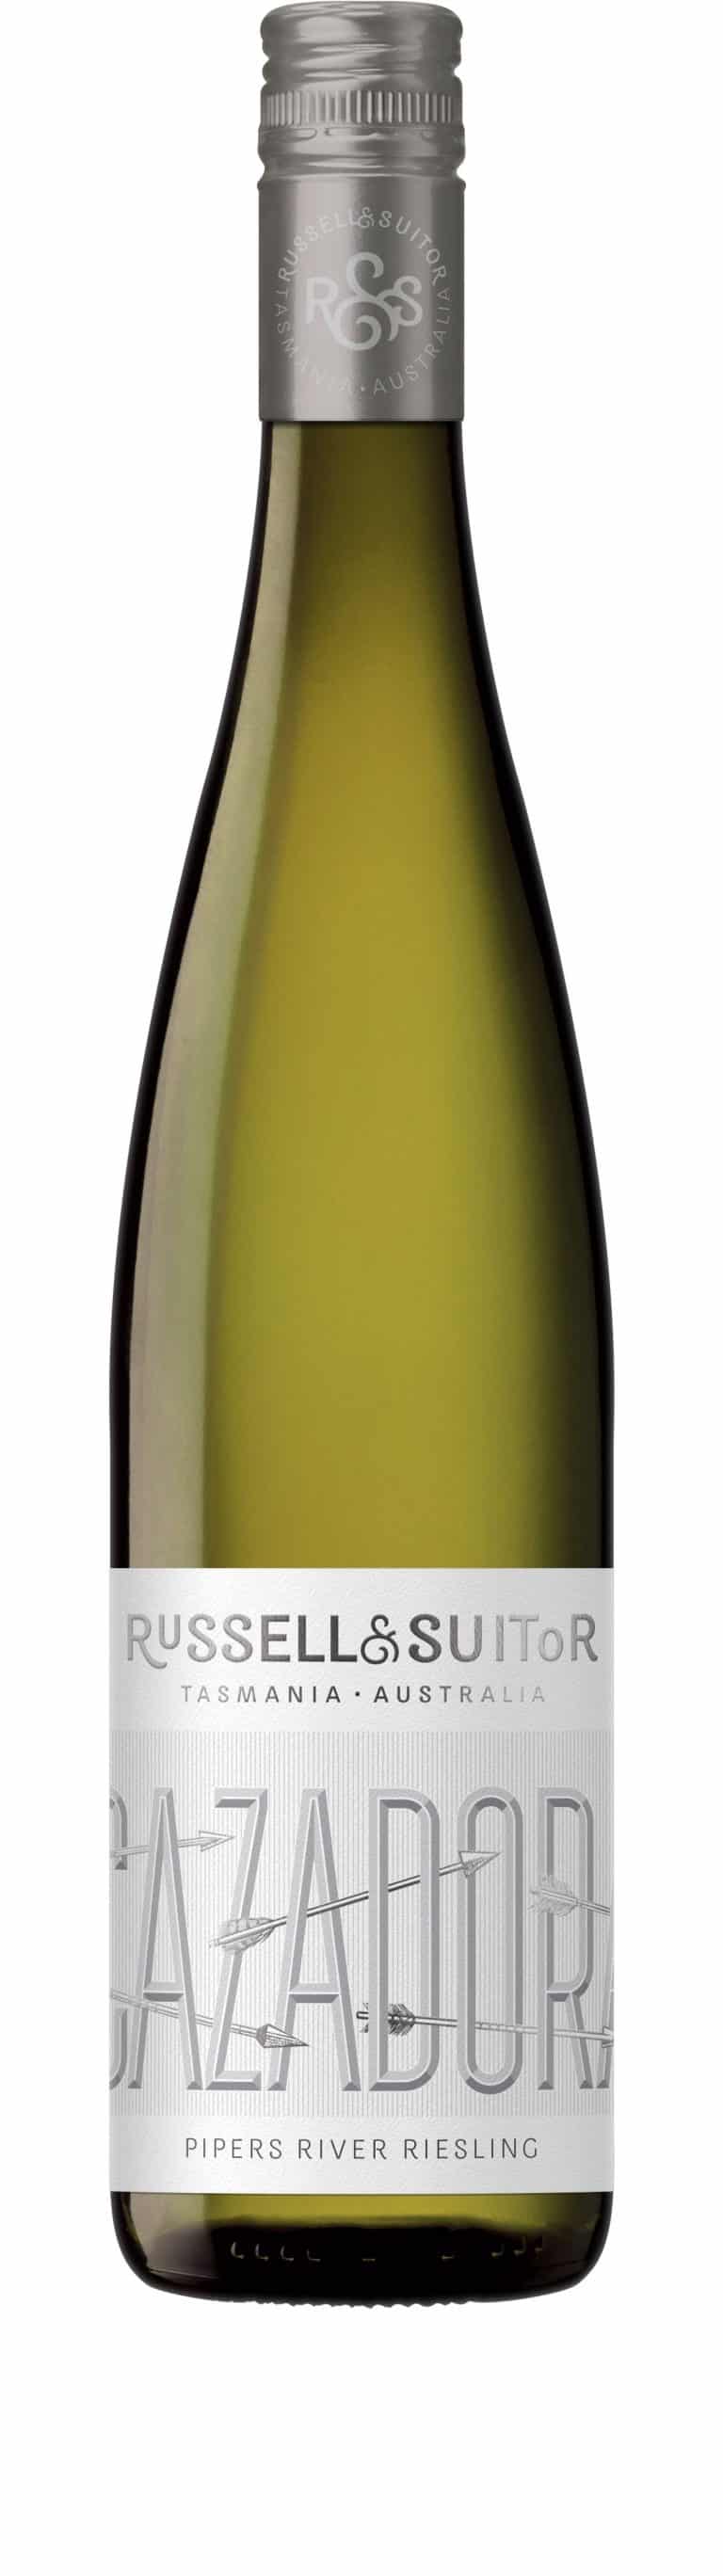 Russell & Suitor Cazadora Riesling